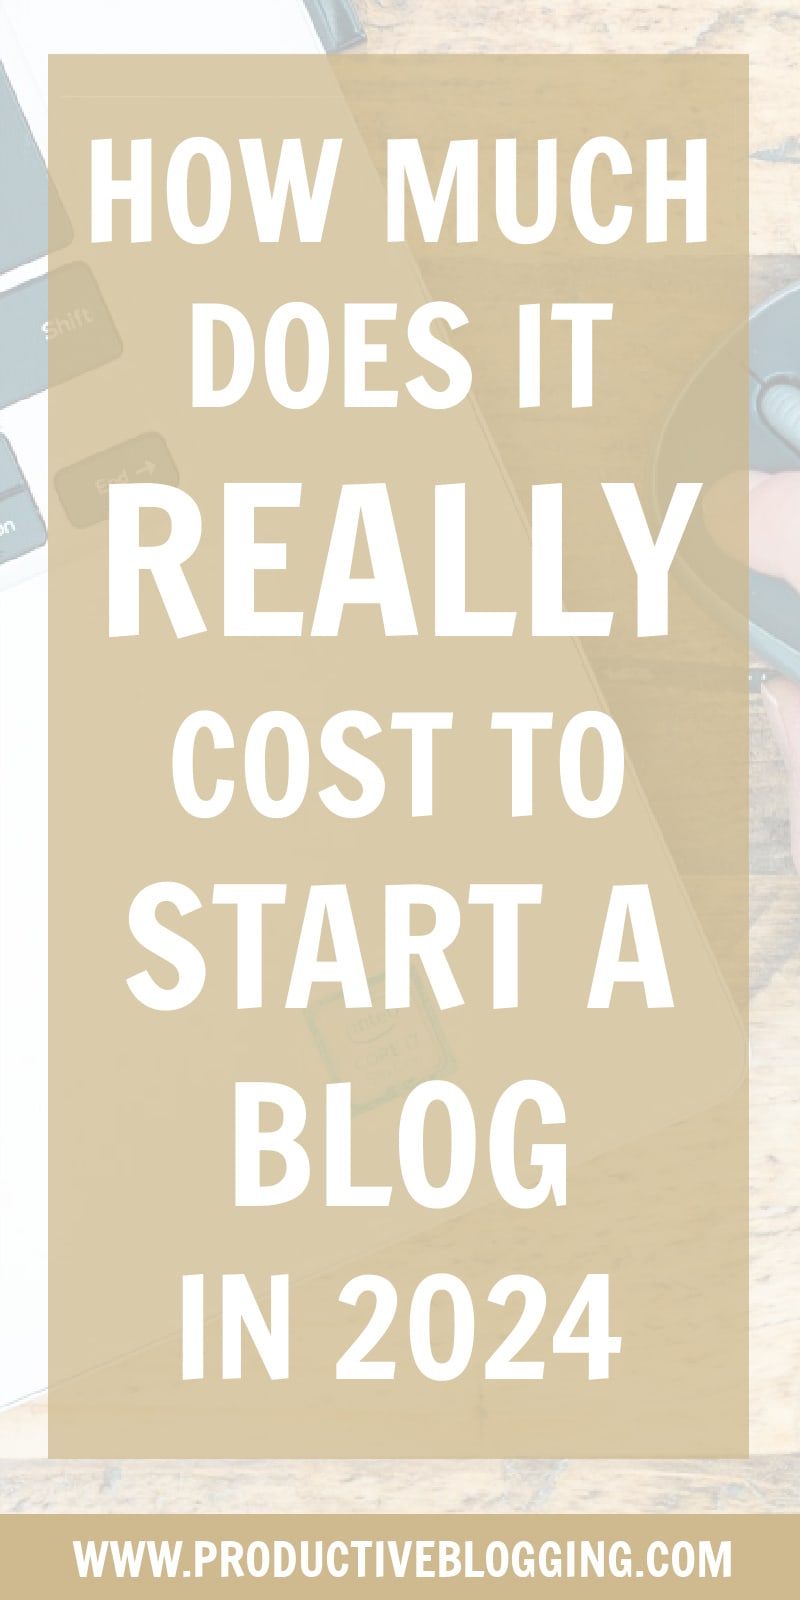 Want to start a blog, but don’t want to waste your money? I explain how much it really costs to start a blog in 2024, what you really need to spend money on right at the start and what can wait until later (plus why starting a free blog is a really bad idea!) #startablog #startablog2024 #bloggingcosts #bloggingexpenses #blogginglife #blogging #blogger #professionalblogger #bloggingismyjob #solopreneur #mompreneur #fempreneur #makemoneyblogging #bloggingbiz #bloggingtips #productiveblogging